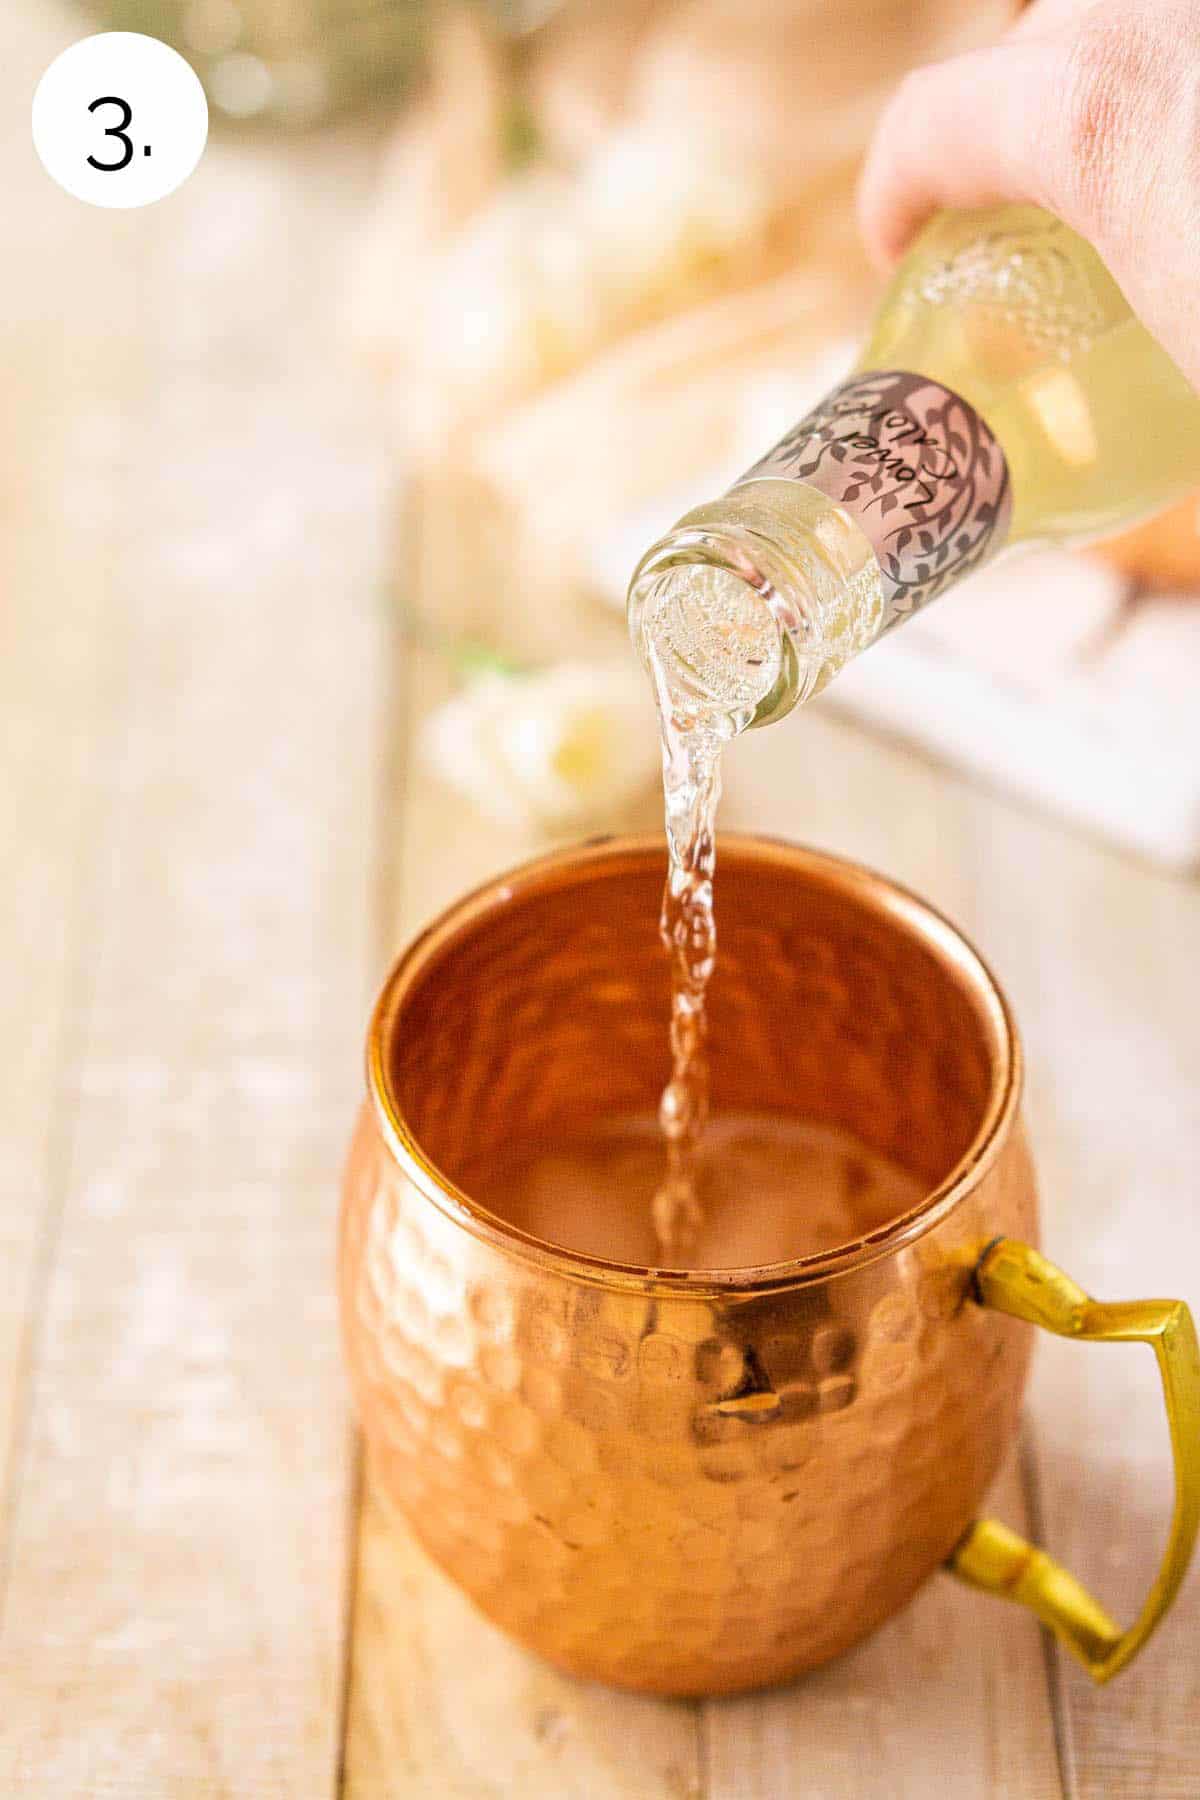 A hand pouring the chilled ginger beer into the copper mug with the other ingredients.